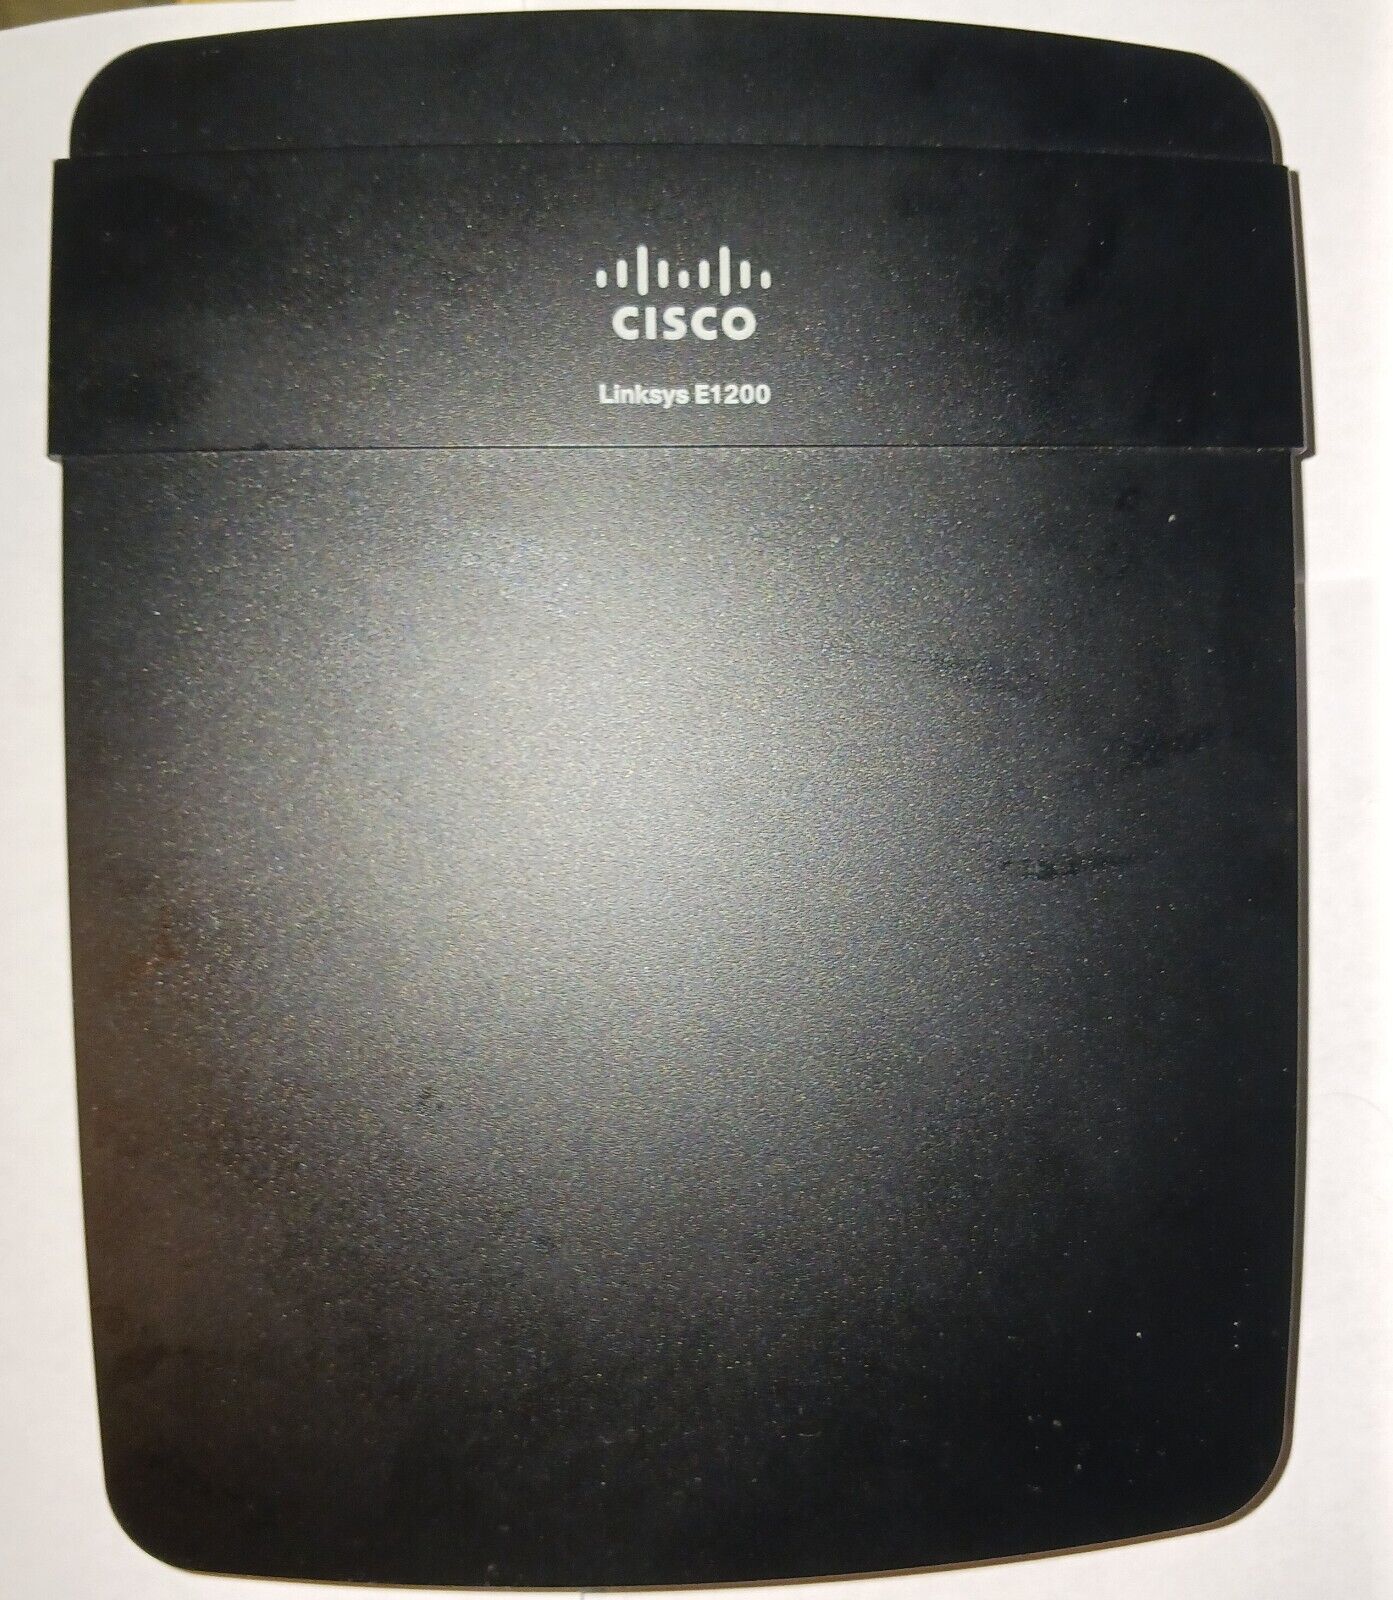 CISCO Linksys E1200 Router Great for separate Network Internal Older E1200